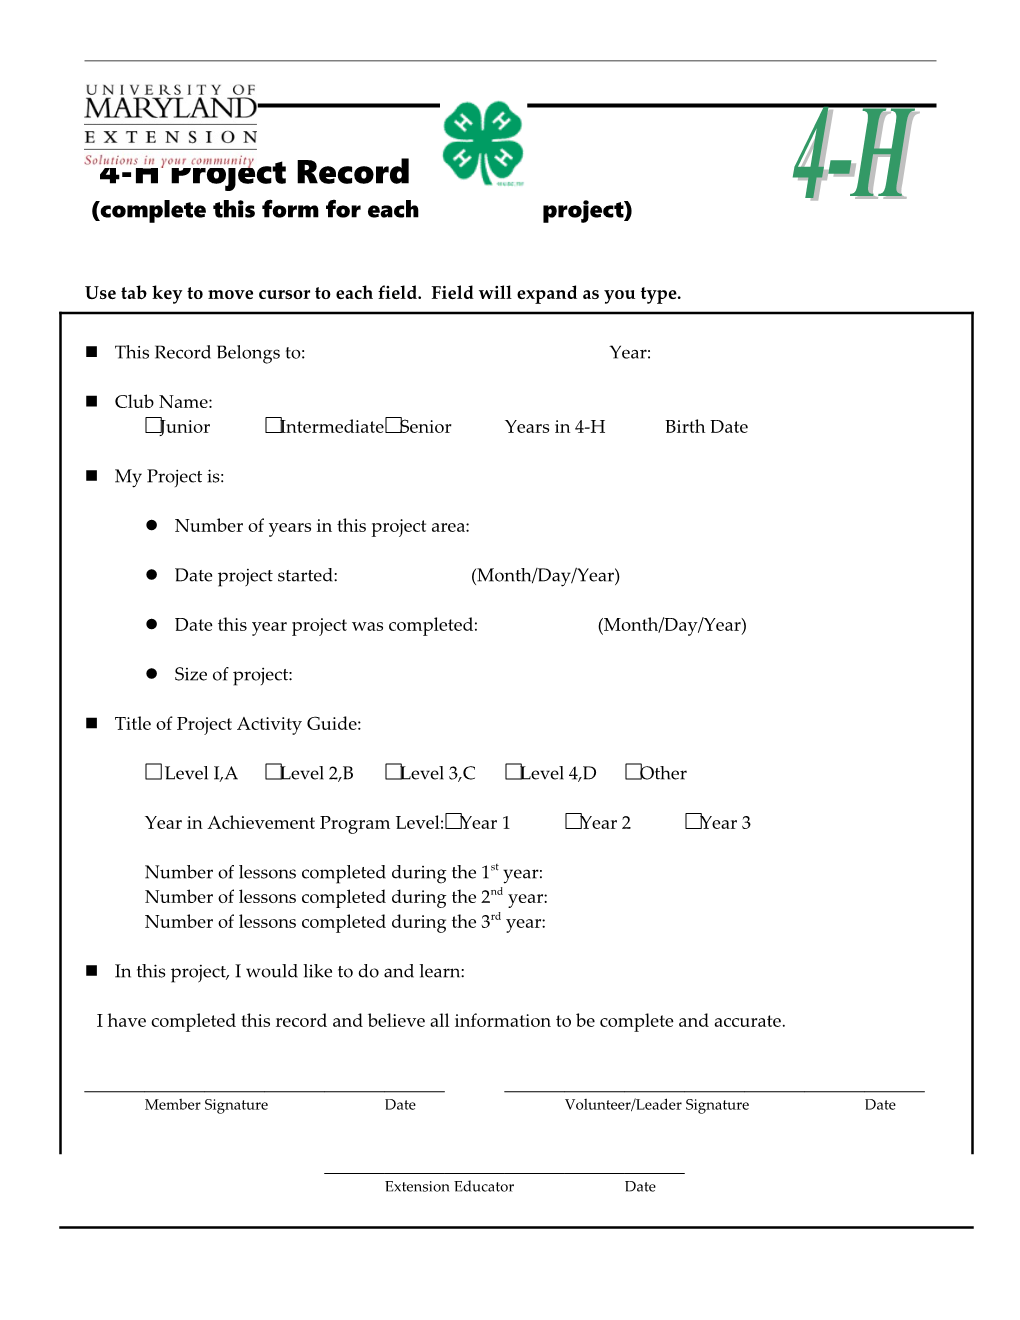 Complete This Form for Each Project